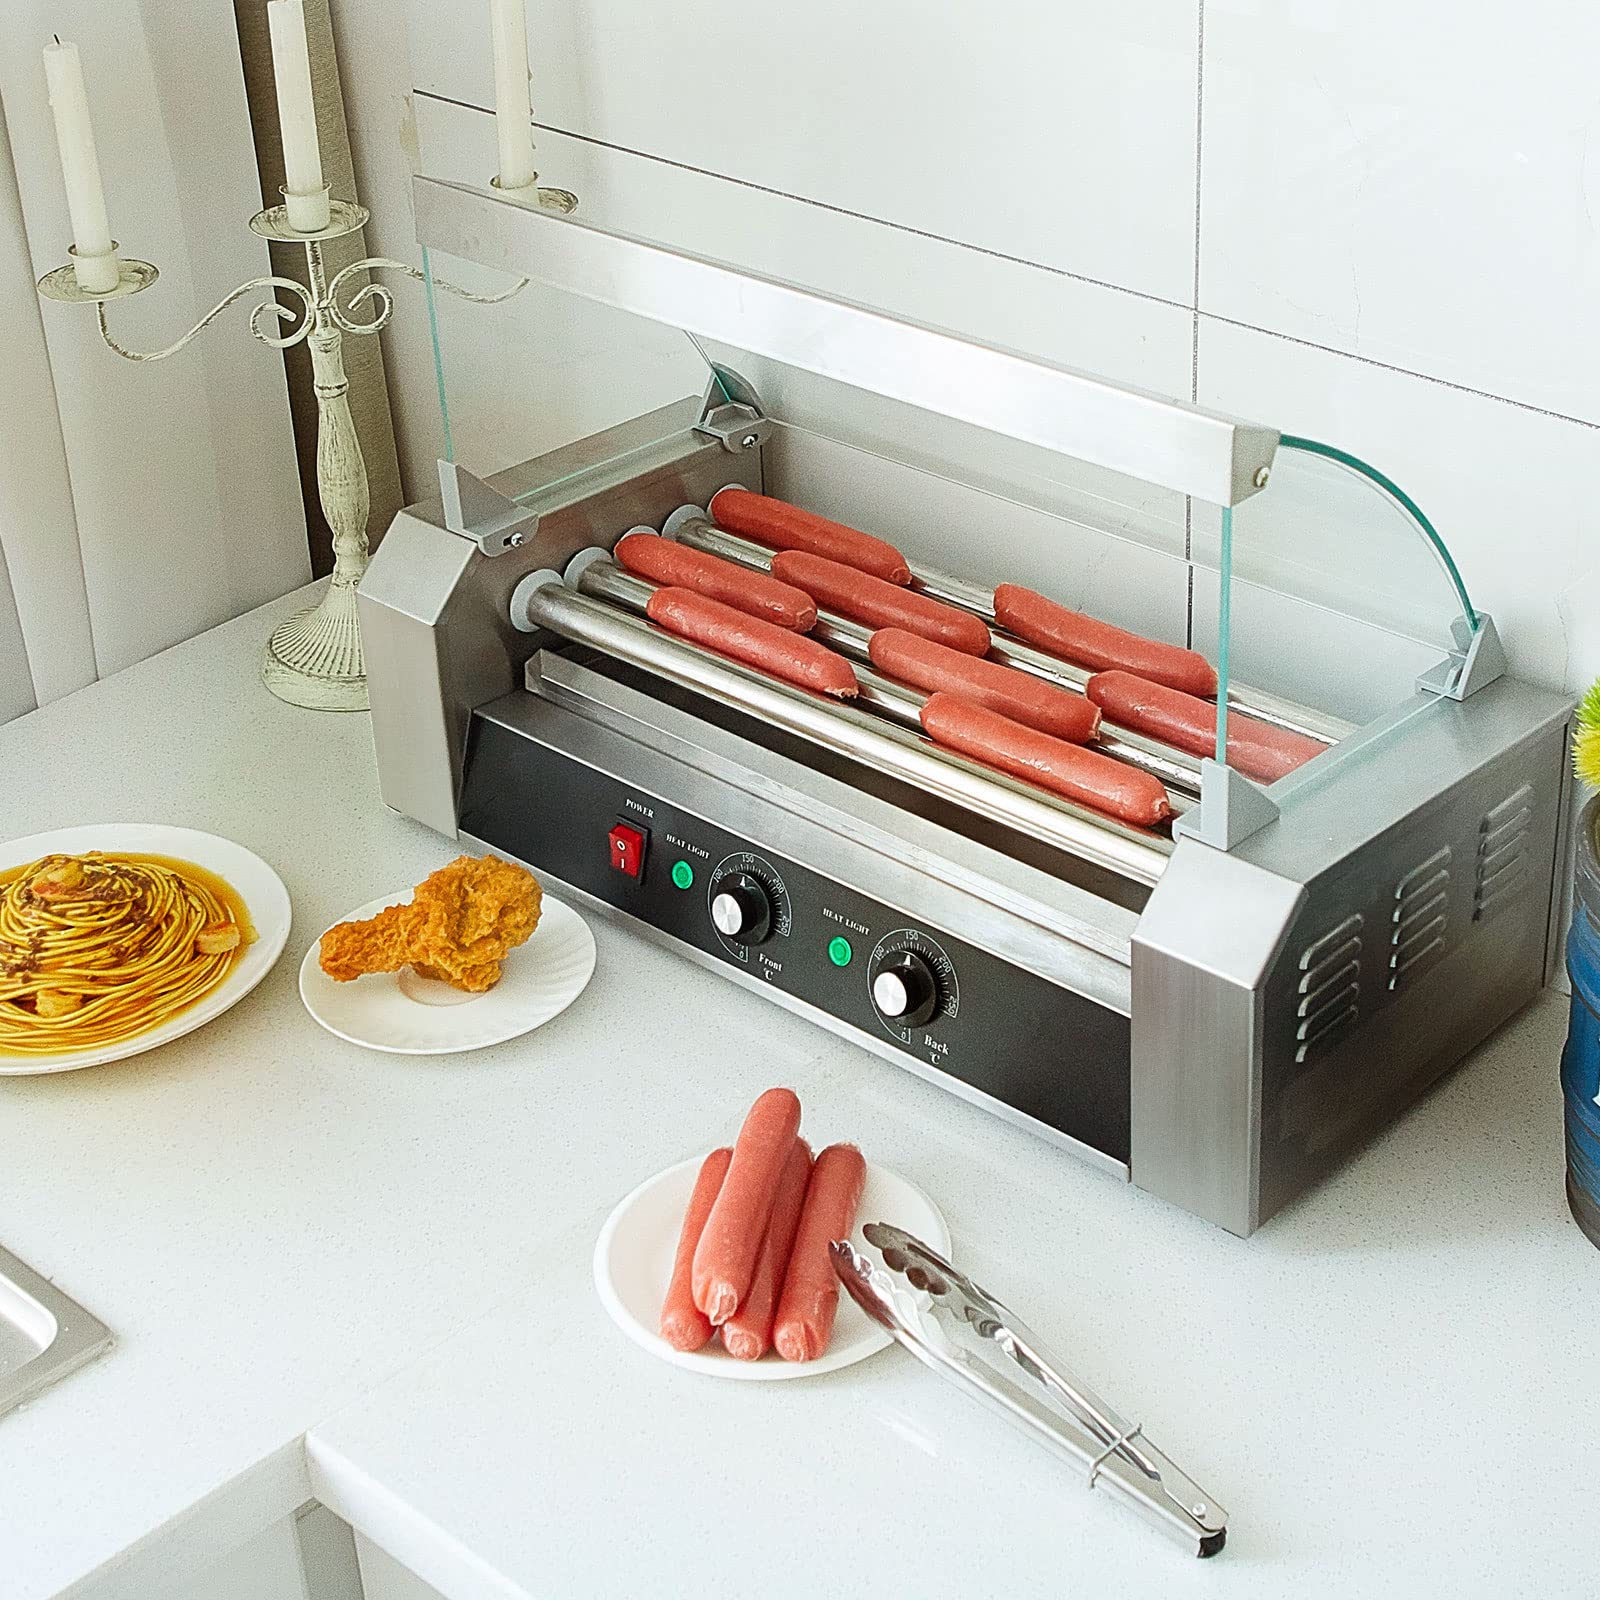 110V Hot Dog Roller Machine 5 Roller 12 Hot Dog Capacity Electric Grill Cooker Machine with Cover Stainless Steel Hot Dog Roller Warmer Sausage Maker for Both Commercial and Household Use